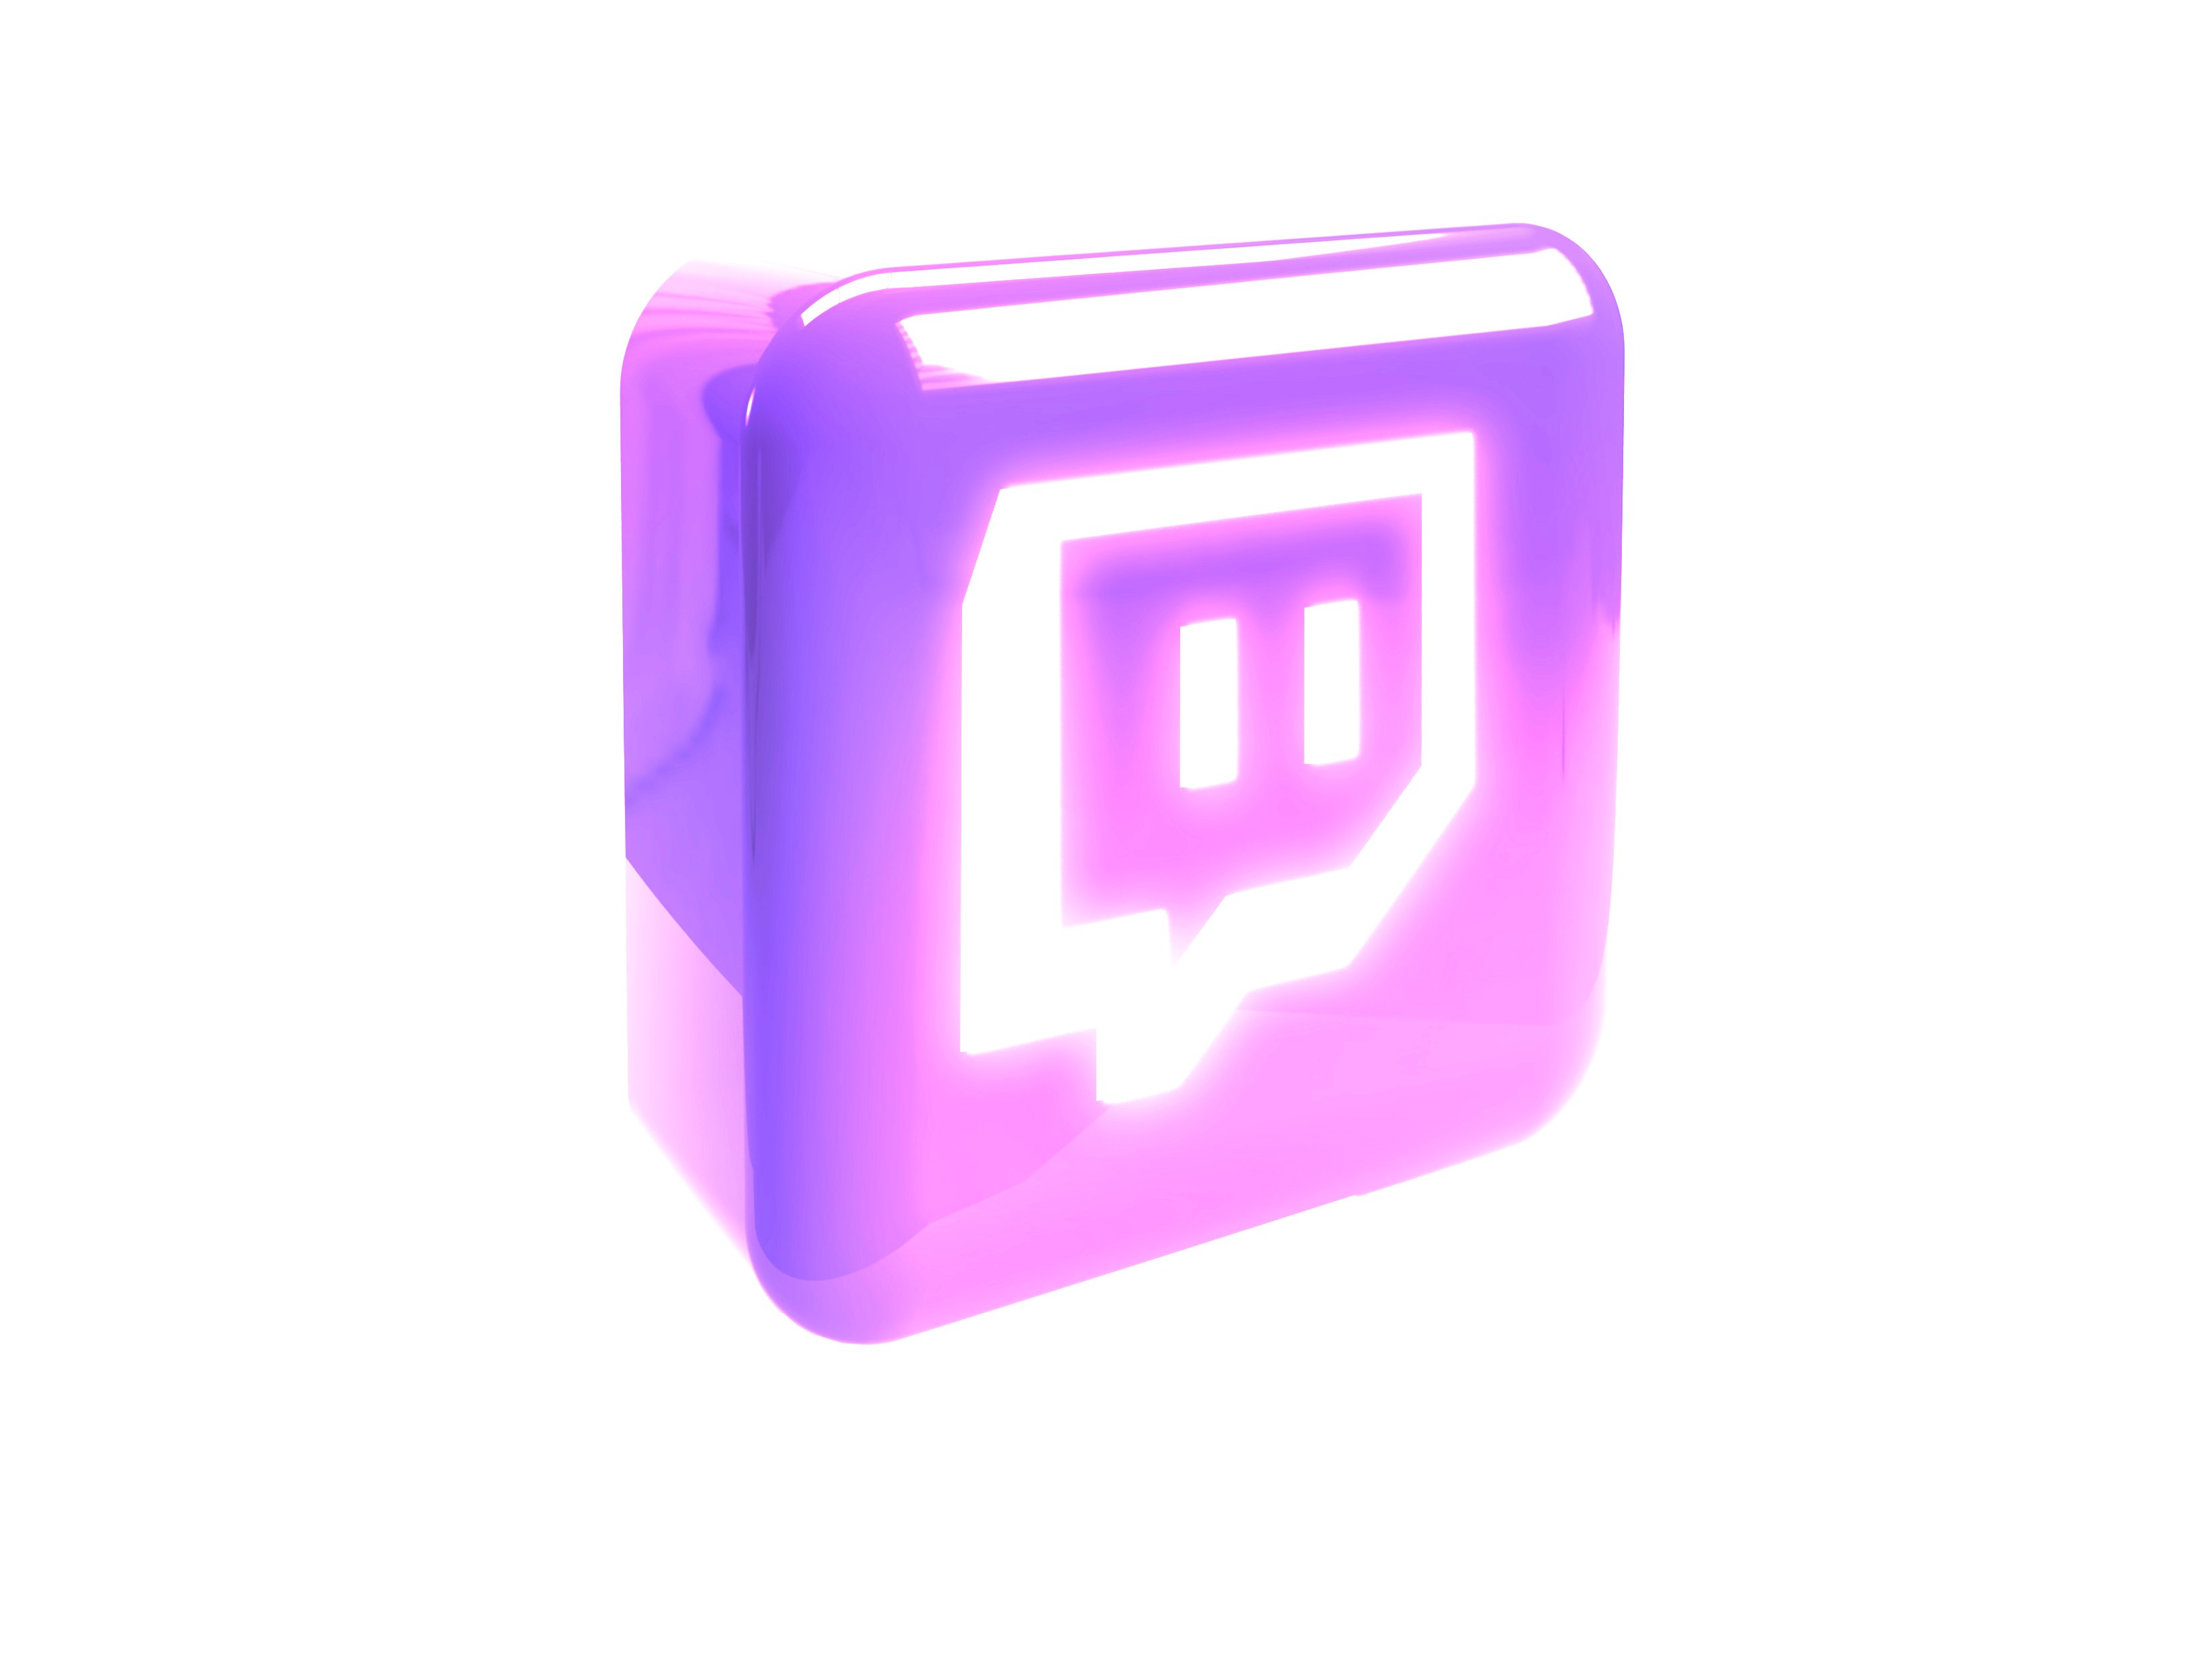 Glossy twitch logo on a white background